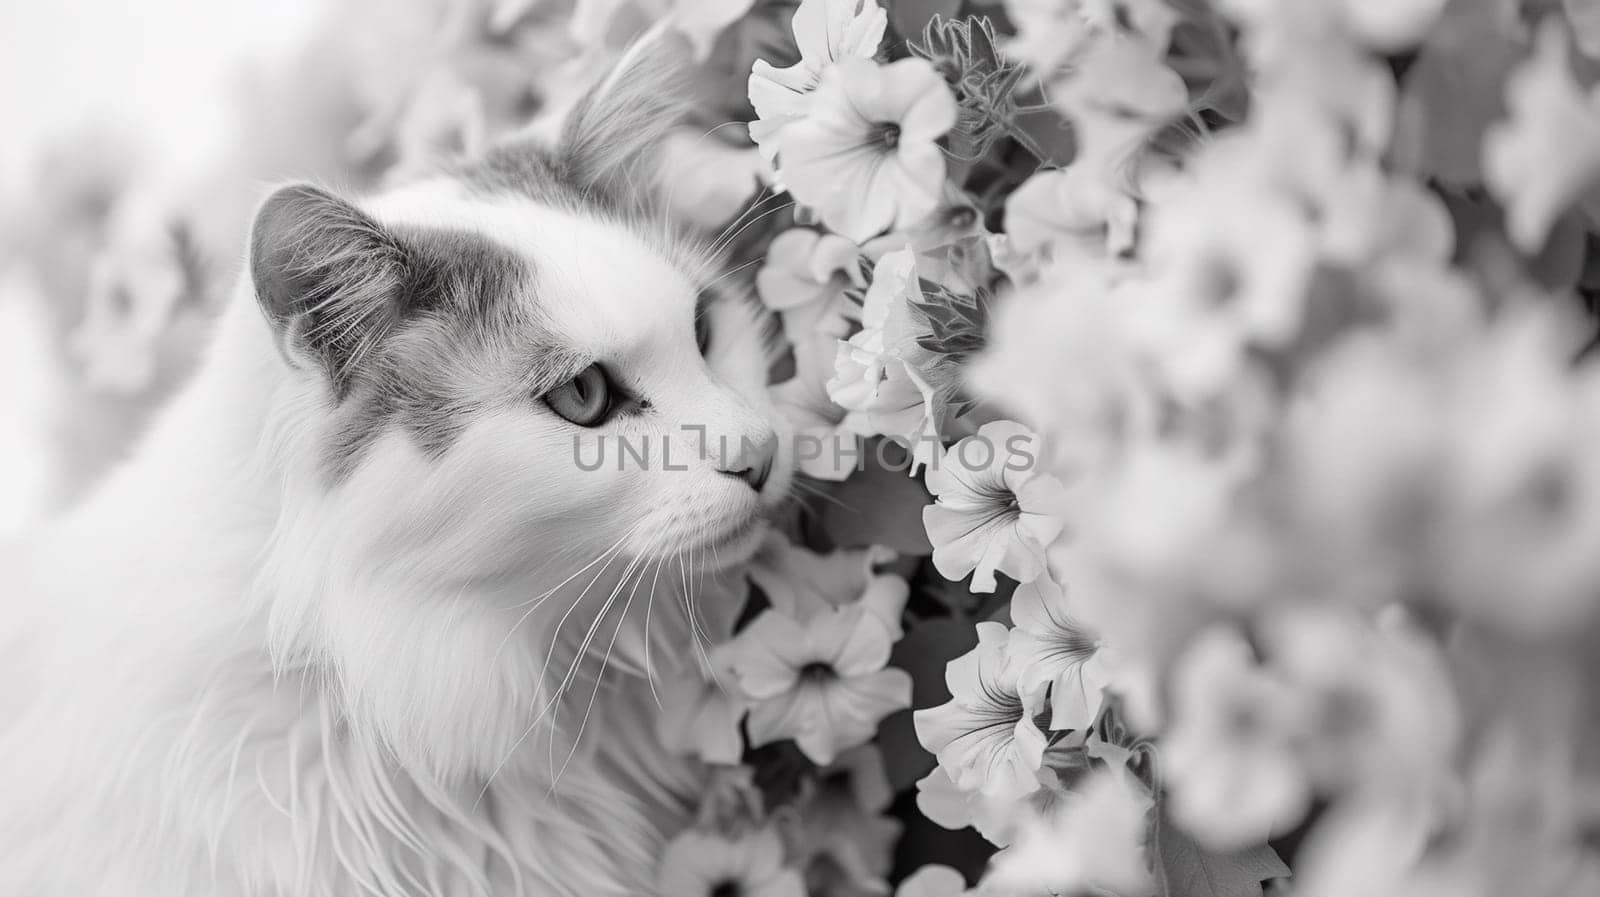 A cat is sniffing flowers in a garden with other plants